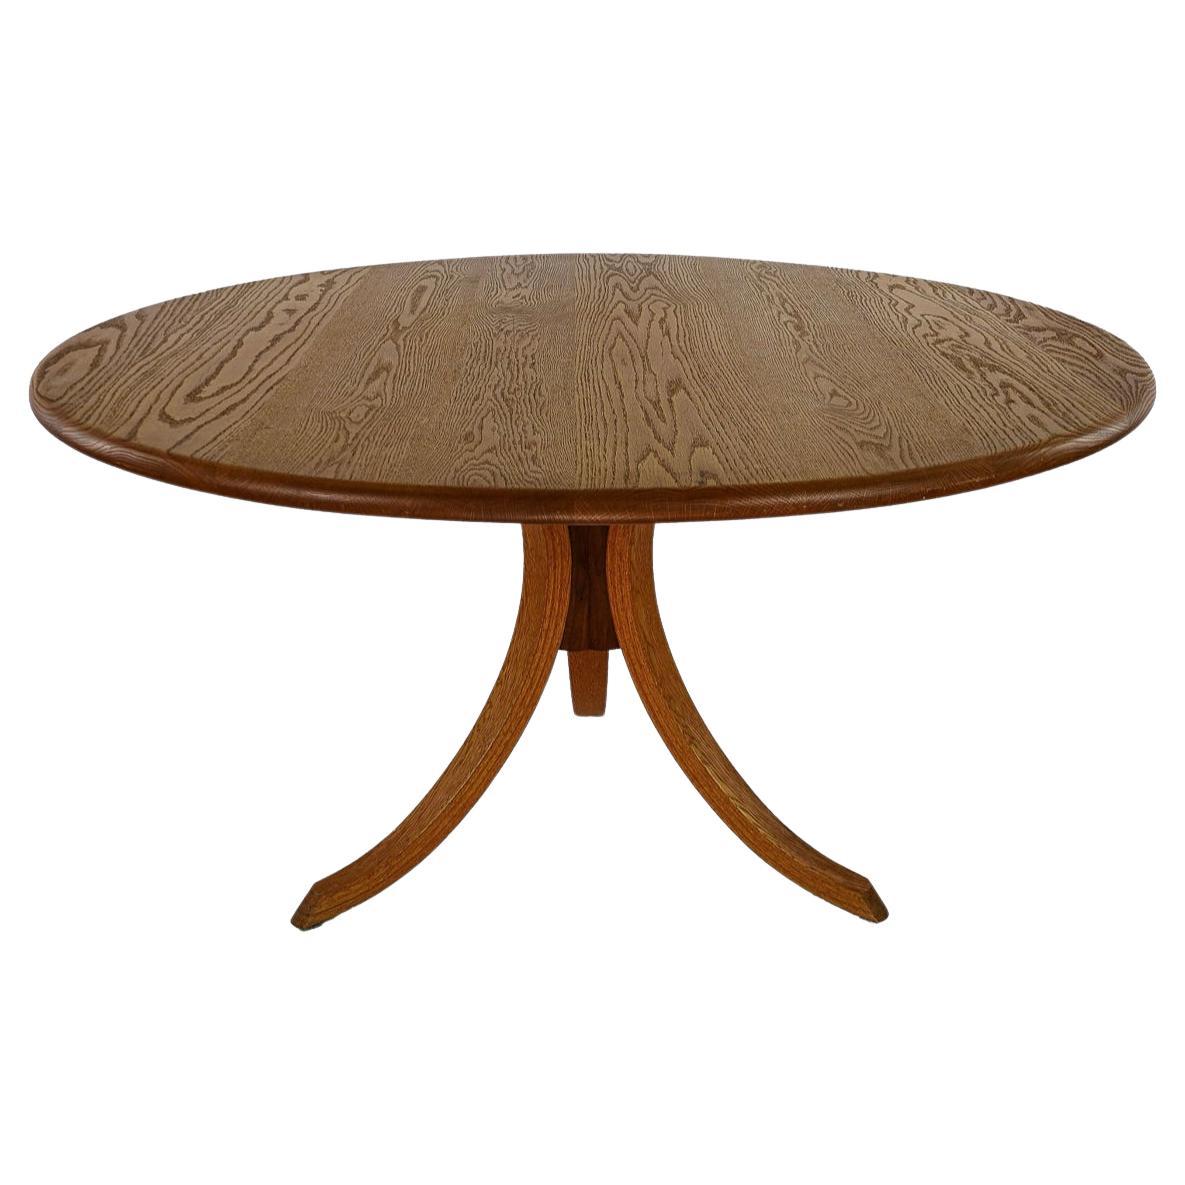 Arts and Crafts Mid century studio craft solid oak round dining table with curved legs